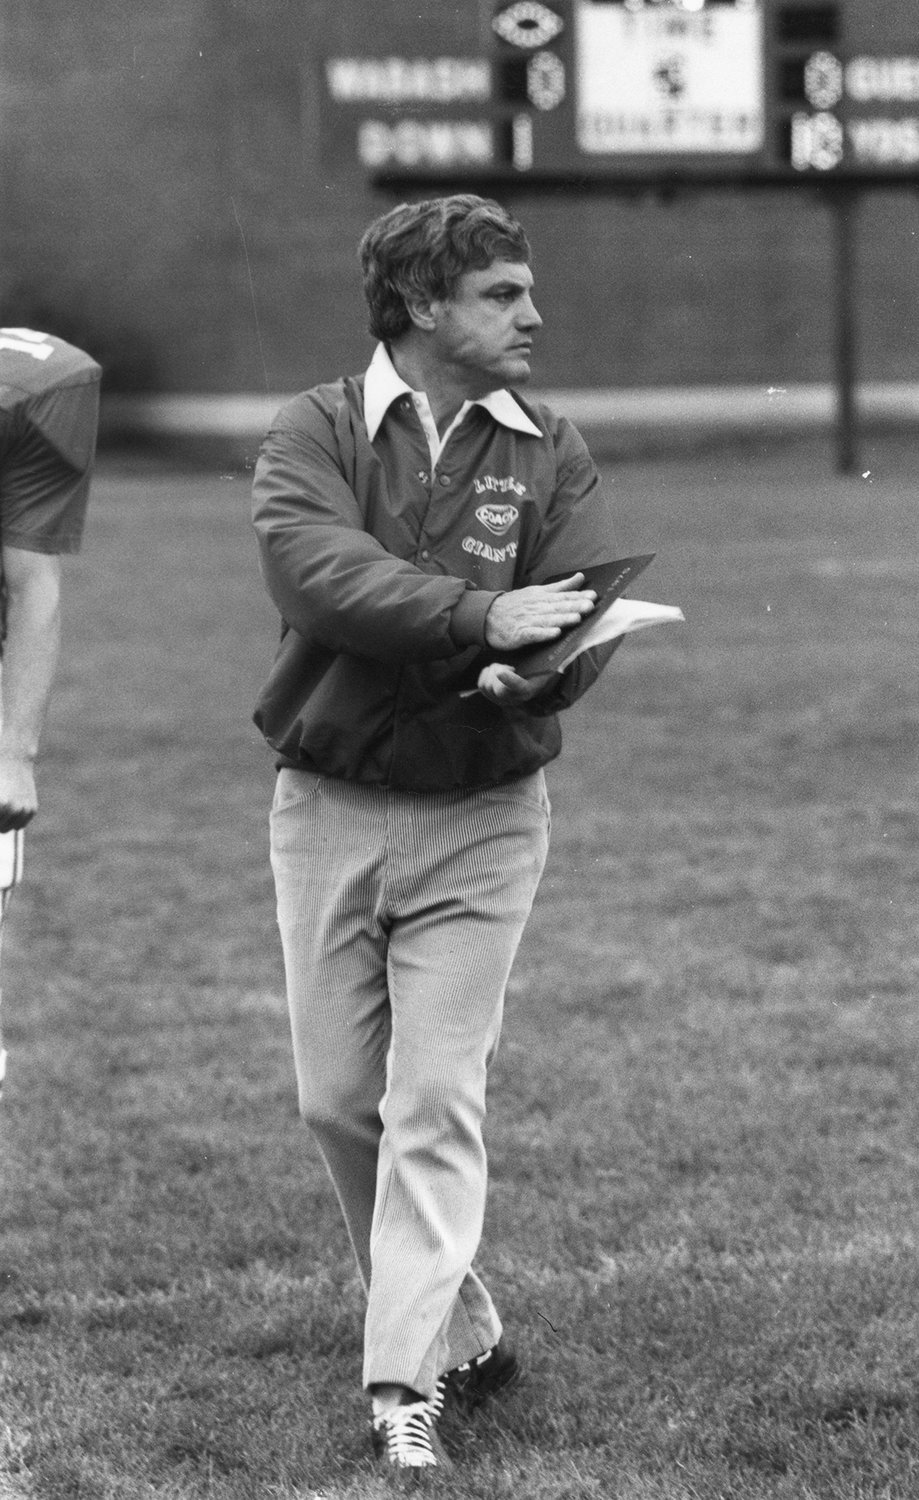 Coach Frank Navarro led Wabash to the Amos Alonzo Stagg Bowl, the NCAA Division III national championship game in 1977.




LGS_Navarro_Field: The playing surface at Little Giant Stadium is named for Frank Navarro.




Navarro_Family: